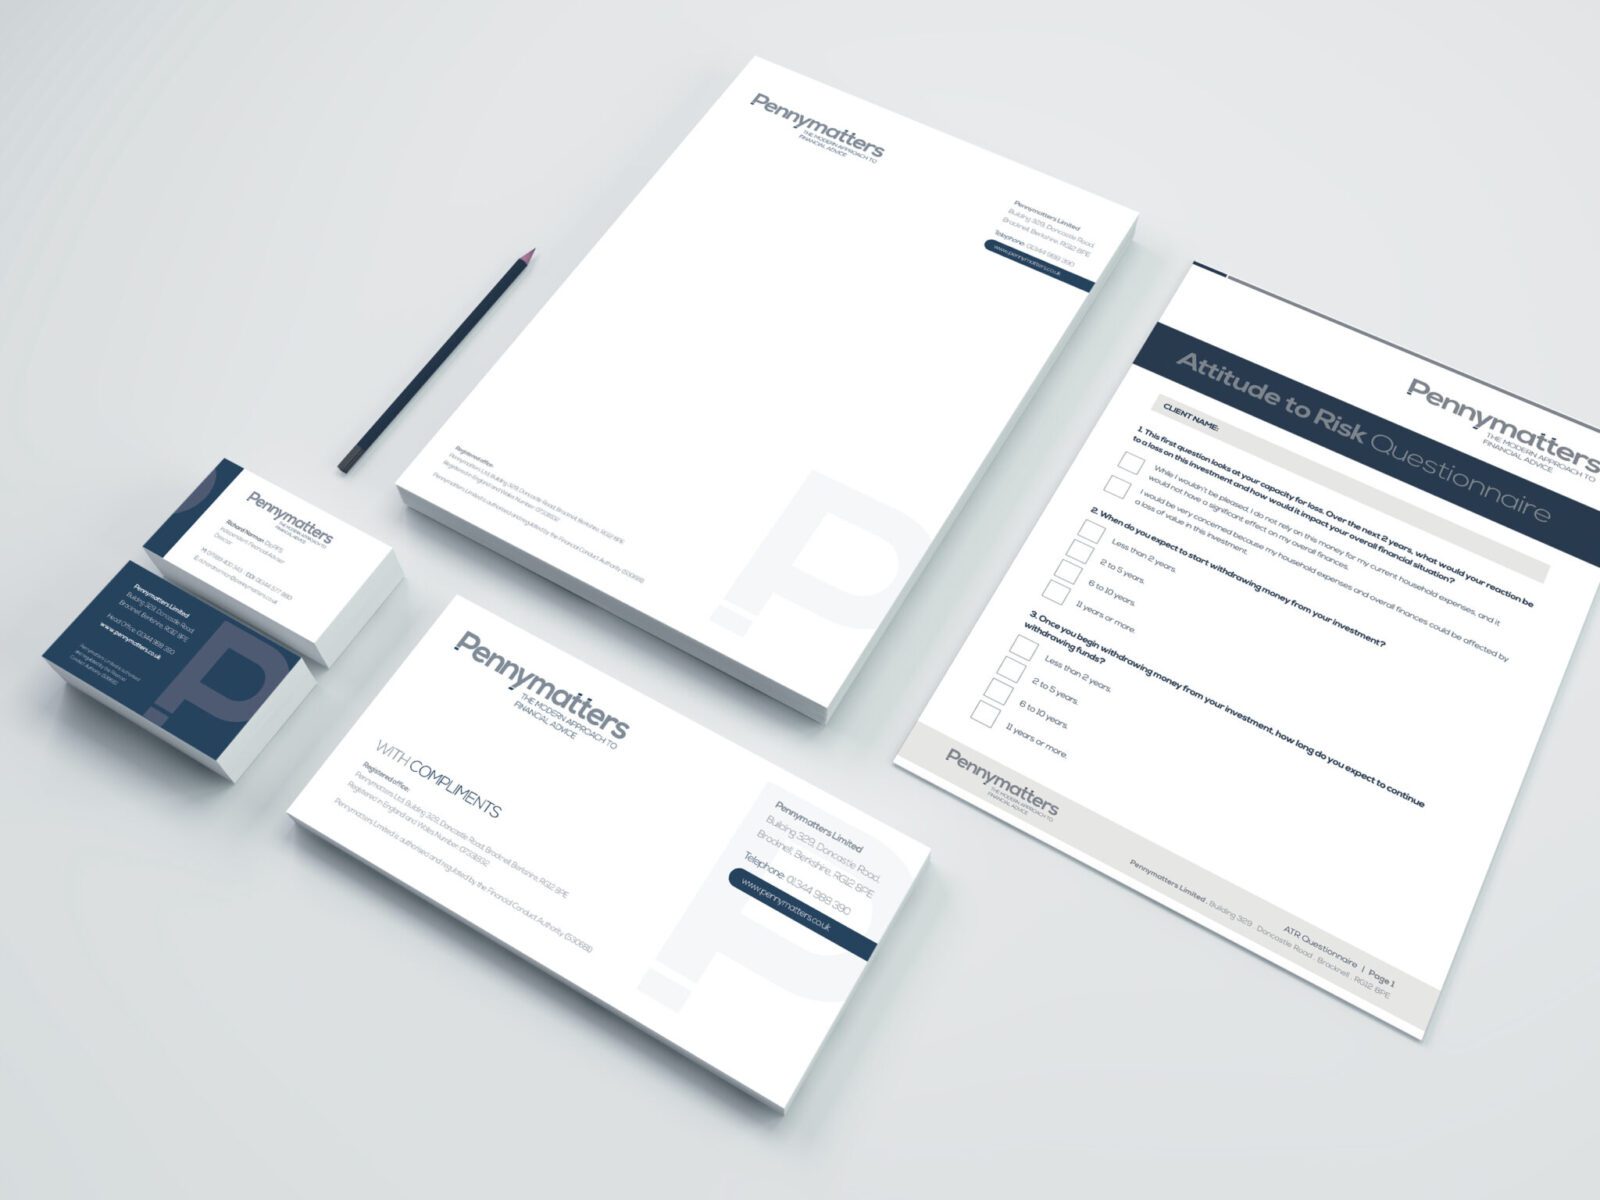 Mock-up of Pennymatters brand and stationery design.